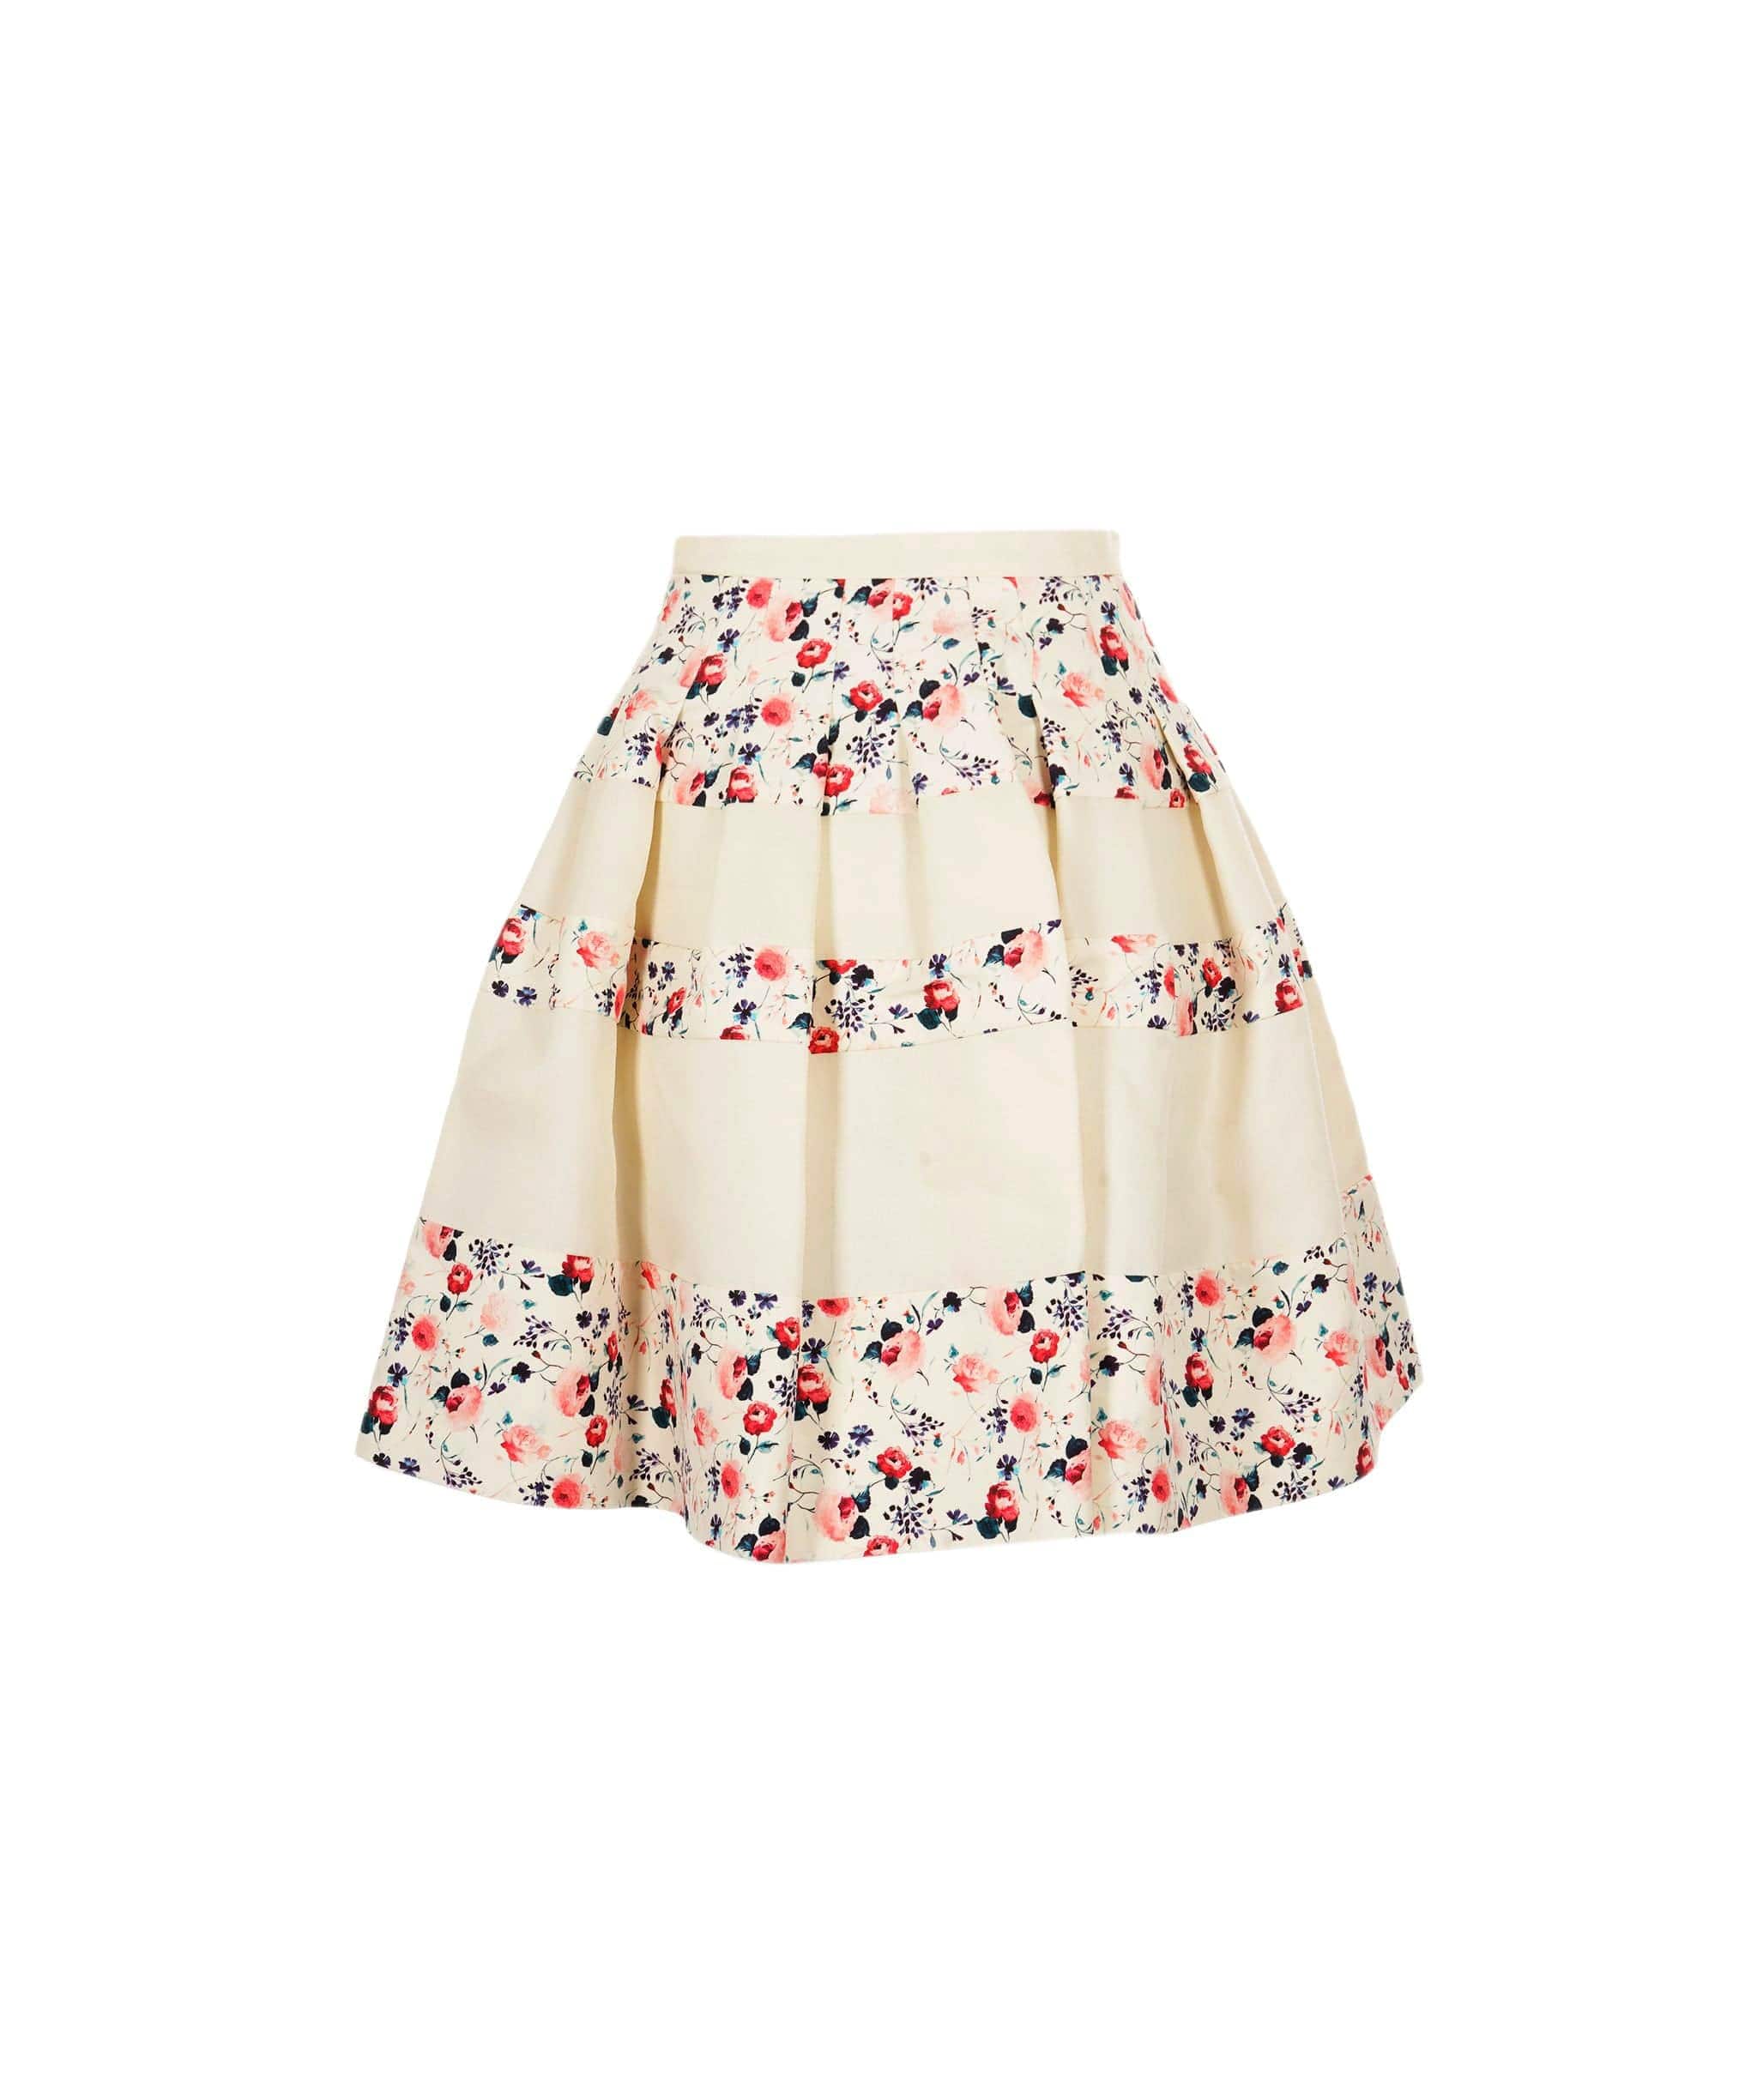 Christian Dior Dior Skirt white with flowers FR38 AVC1264